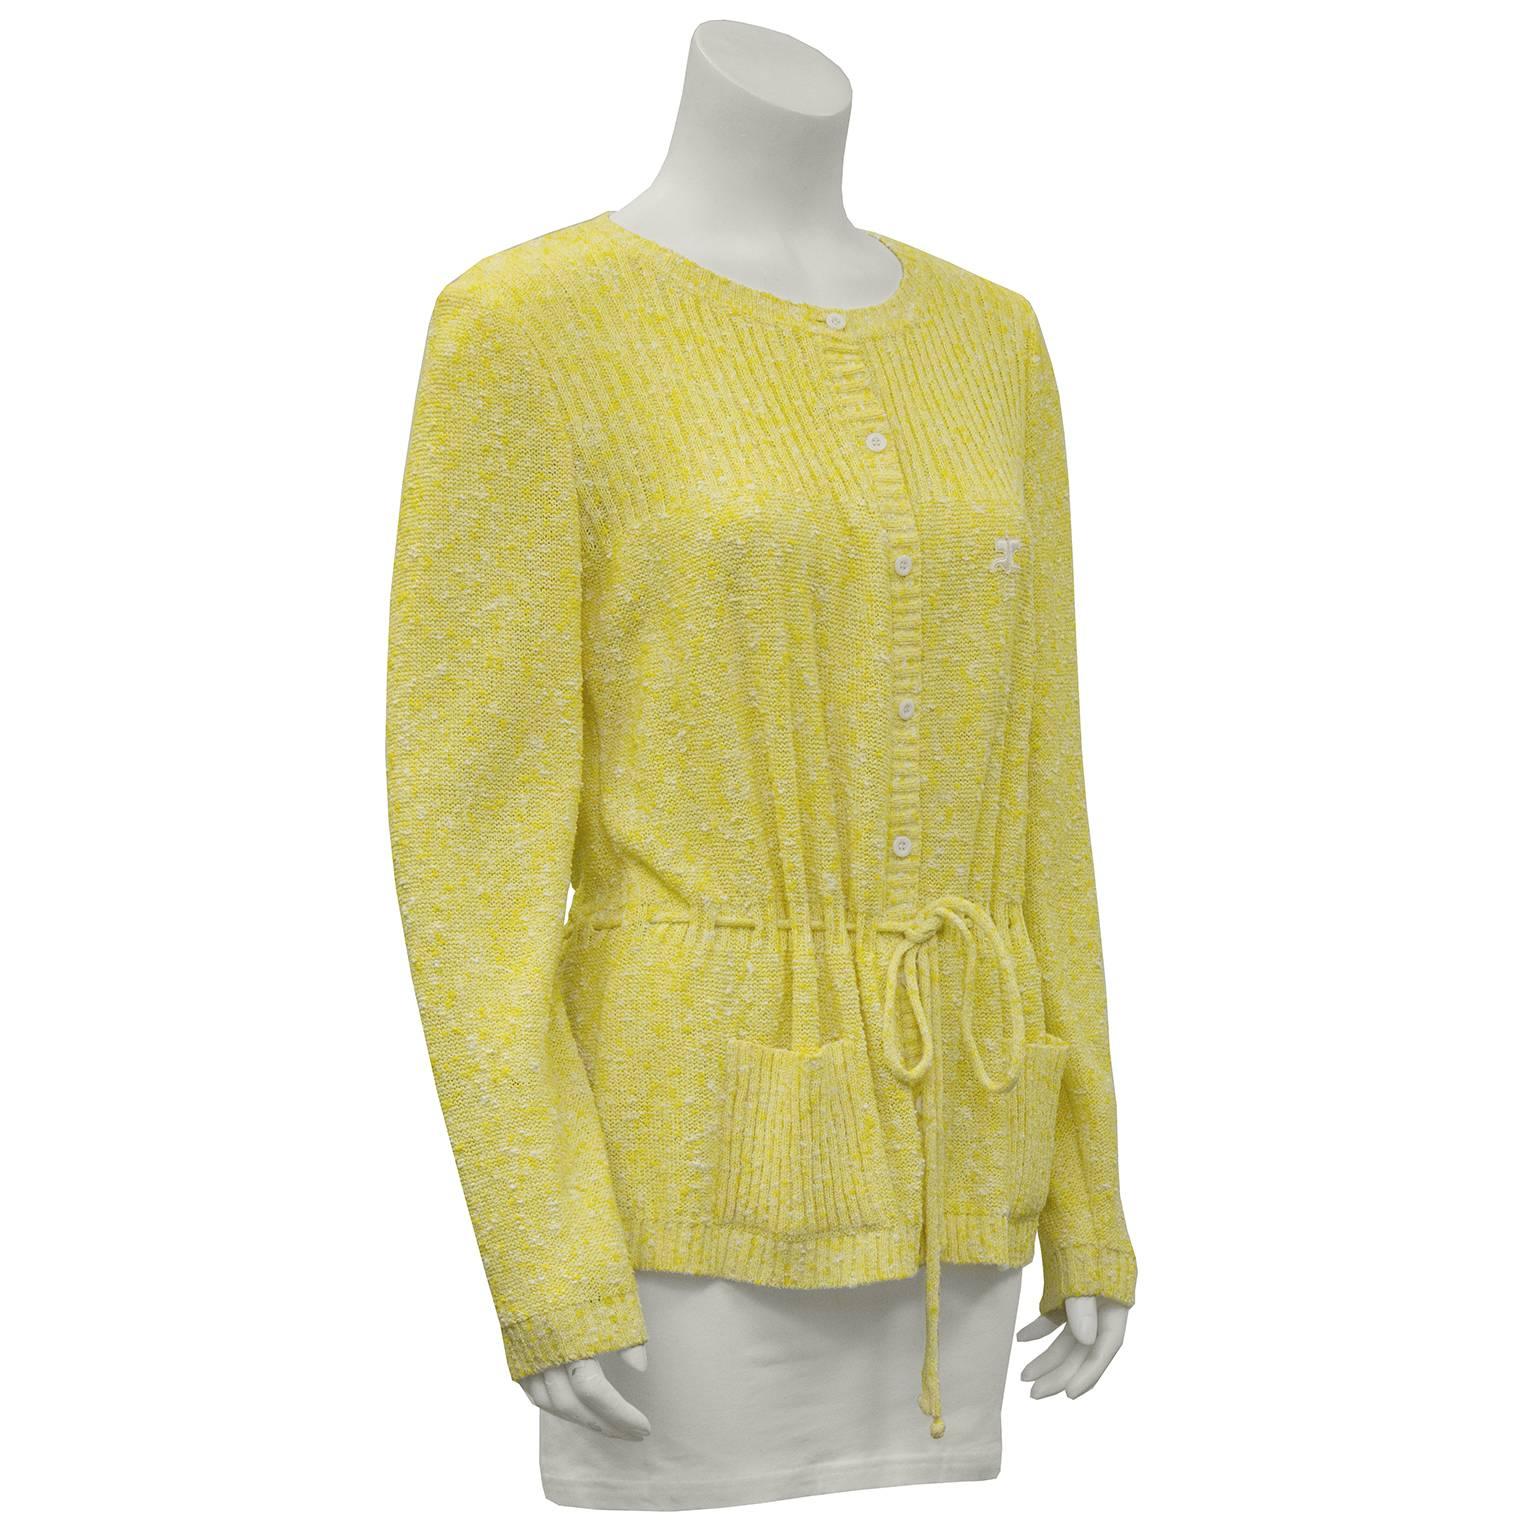 Knobbly yellow and white cotton knit cardigan by Courreges circa 1970. Button down the front with ribbed details. Drawstring belt through natural waistline. In excellent condition. Two patch pockets on the front. Fits like a US size 8.